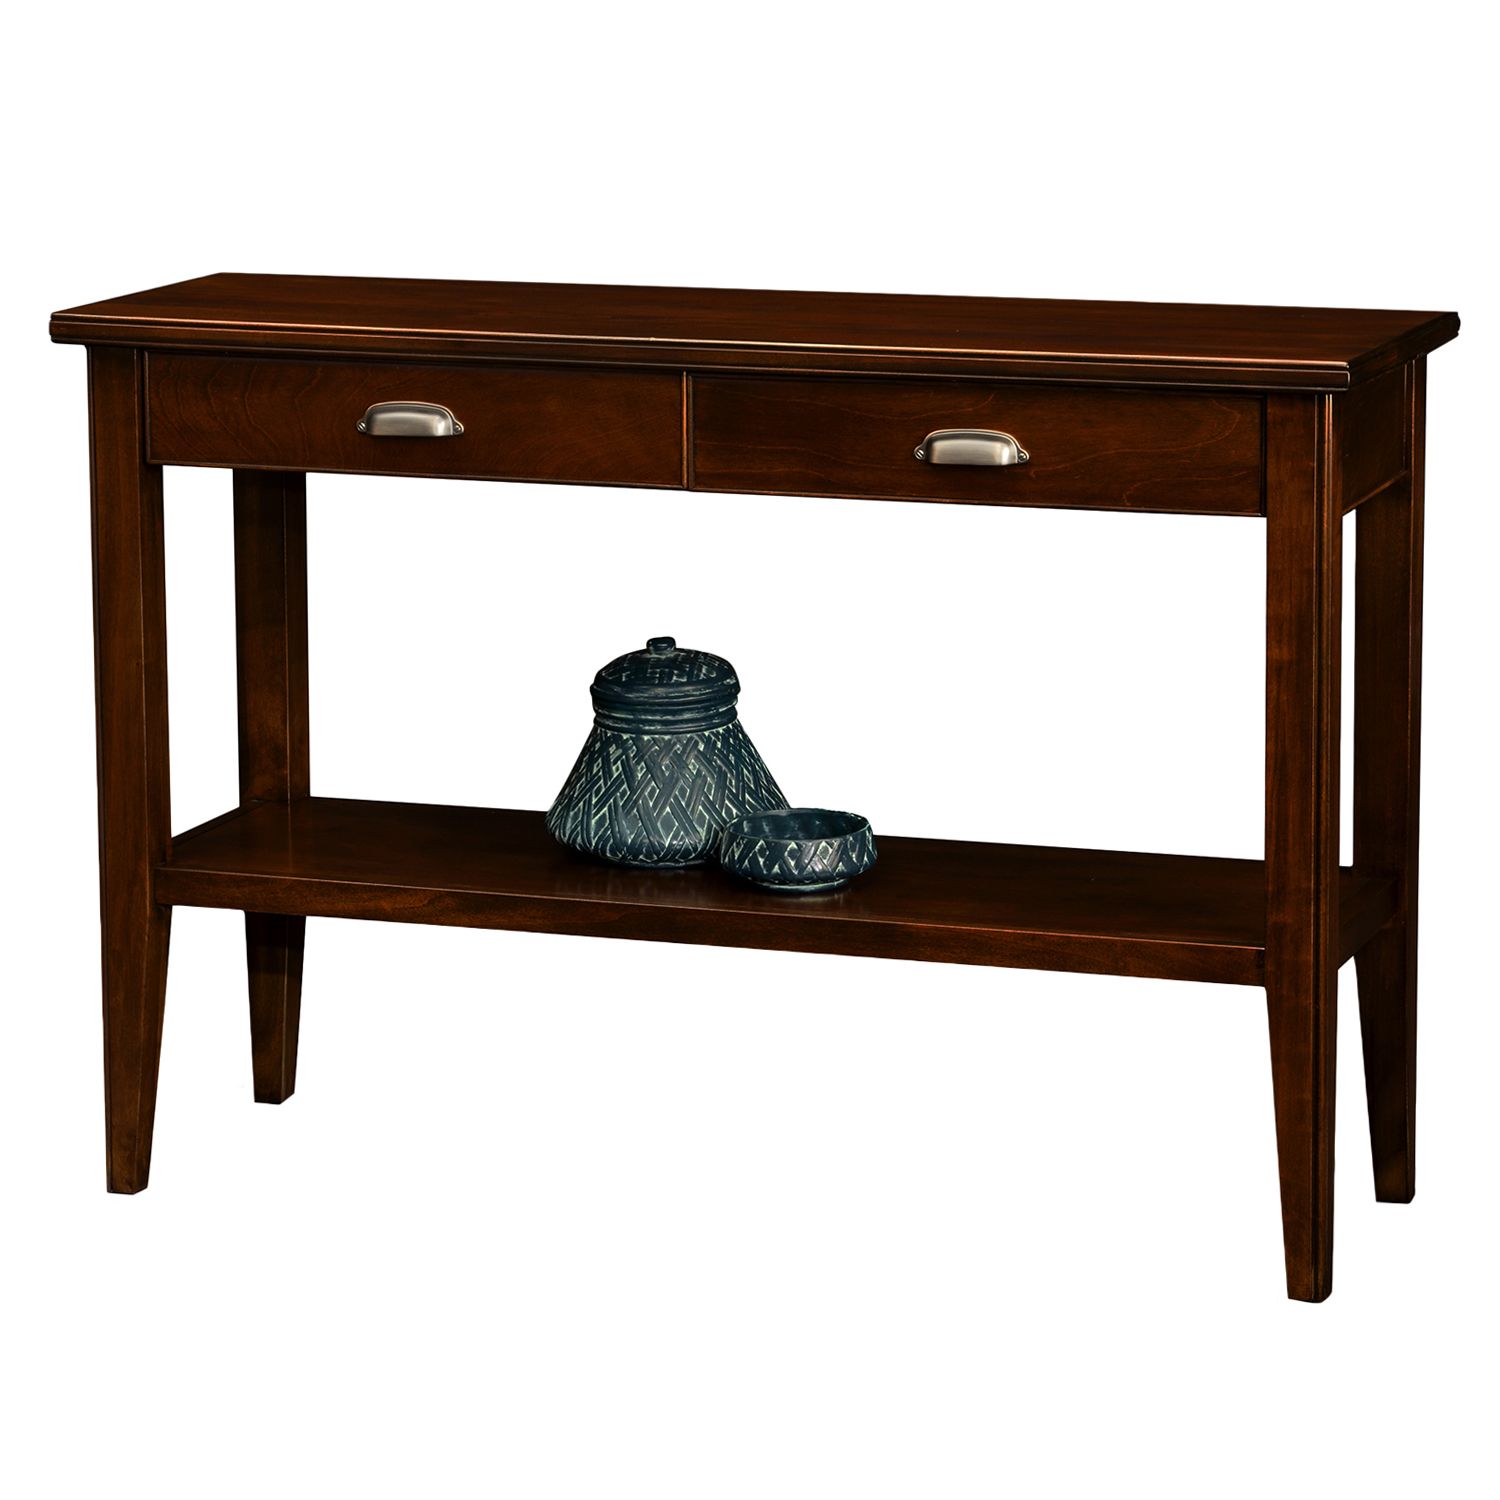 Image for Leick Furniture Chocolate Cherry Finish 2-Drawer Sofa Table at Kohl's.